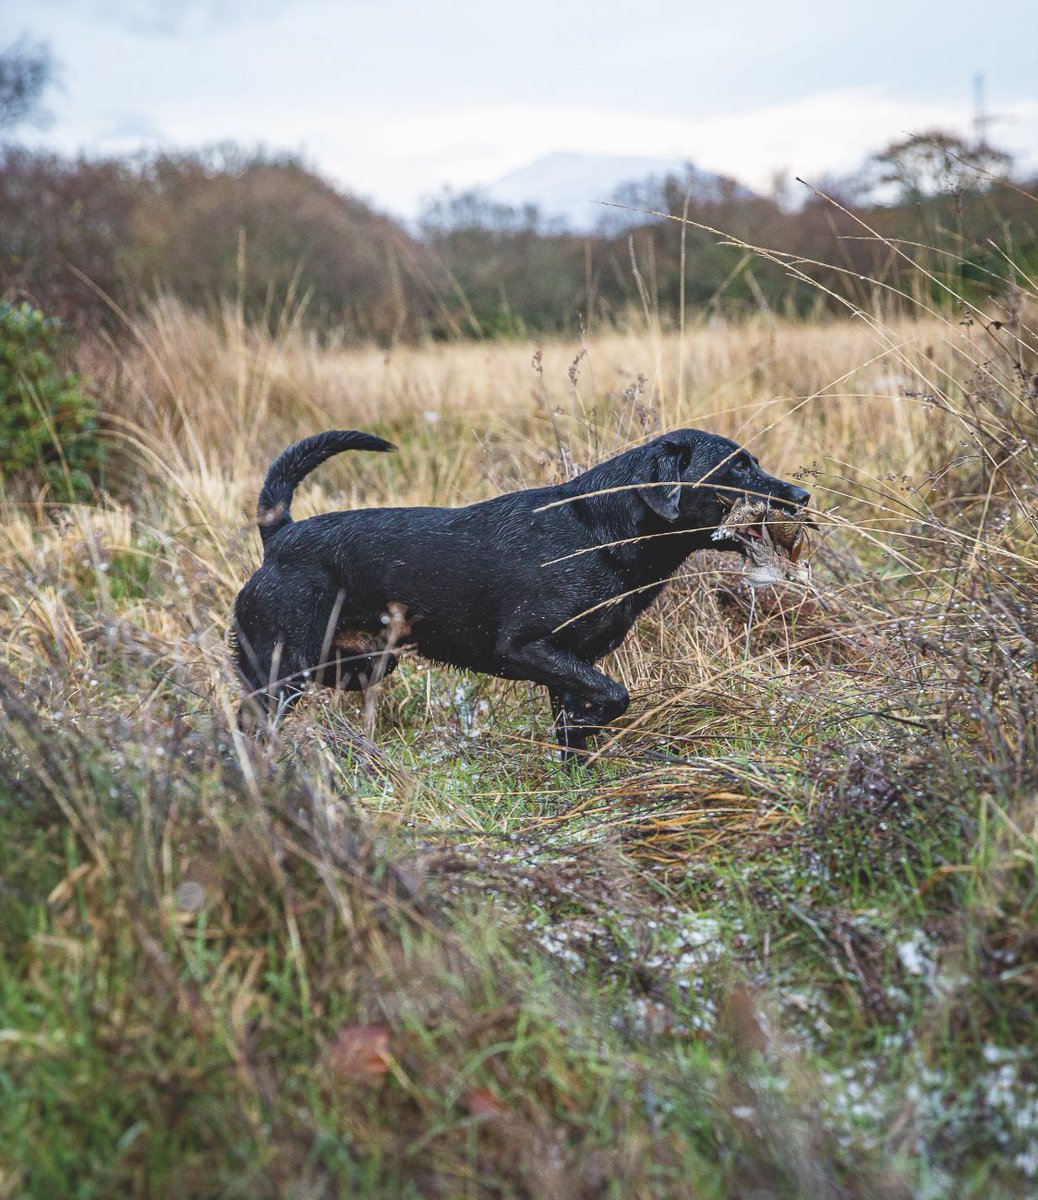 Issue 6431: @GethinJones123 heads out for a woodcock, @TimMaddamsChef is cooking rabbit and chorizo, and @johnmushroom on winter foraging, as well as superb gundog work in Norfolk, duck flighting in Lincolnshire, and wildfowling in Essex 🦆